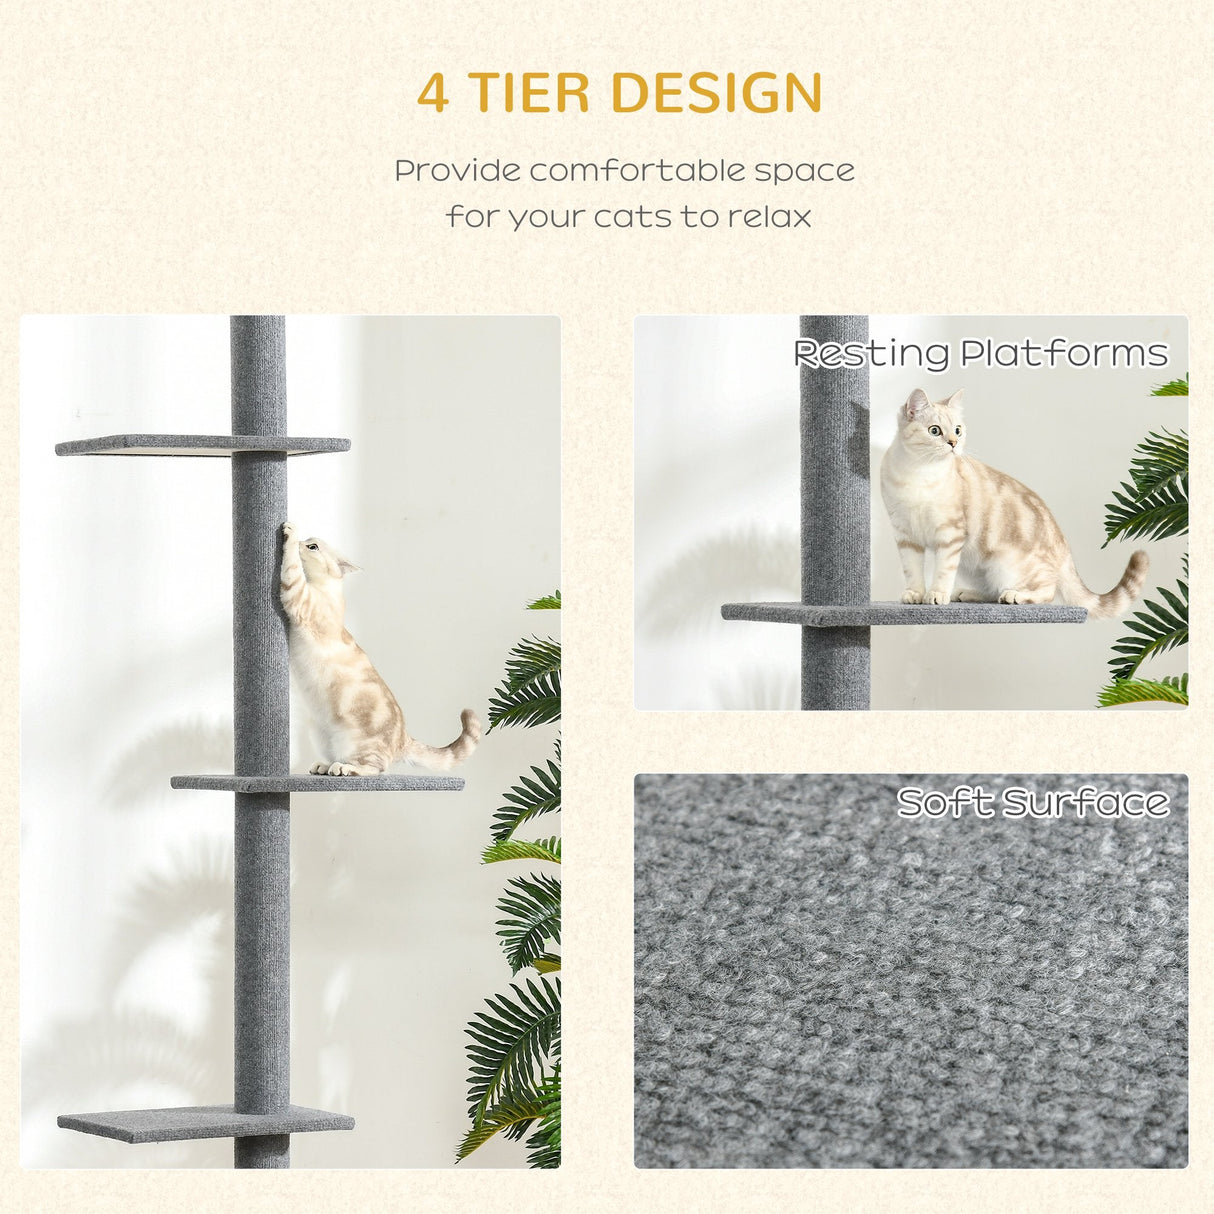 260cm Floor To Ceiling Cat Tree w/ 3 Perches Flannel Upholstery, PawHut, Brown